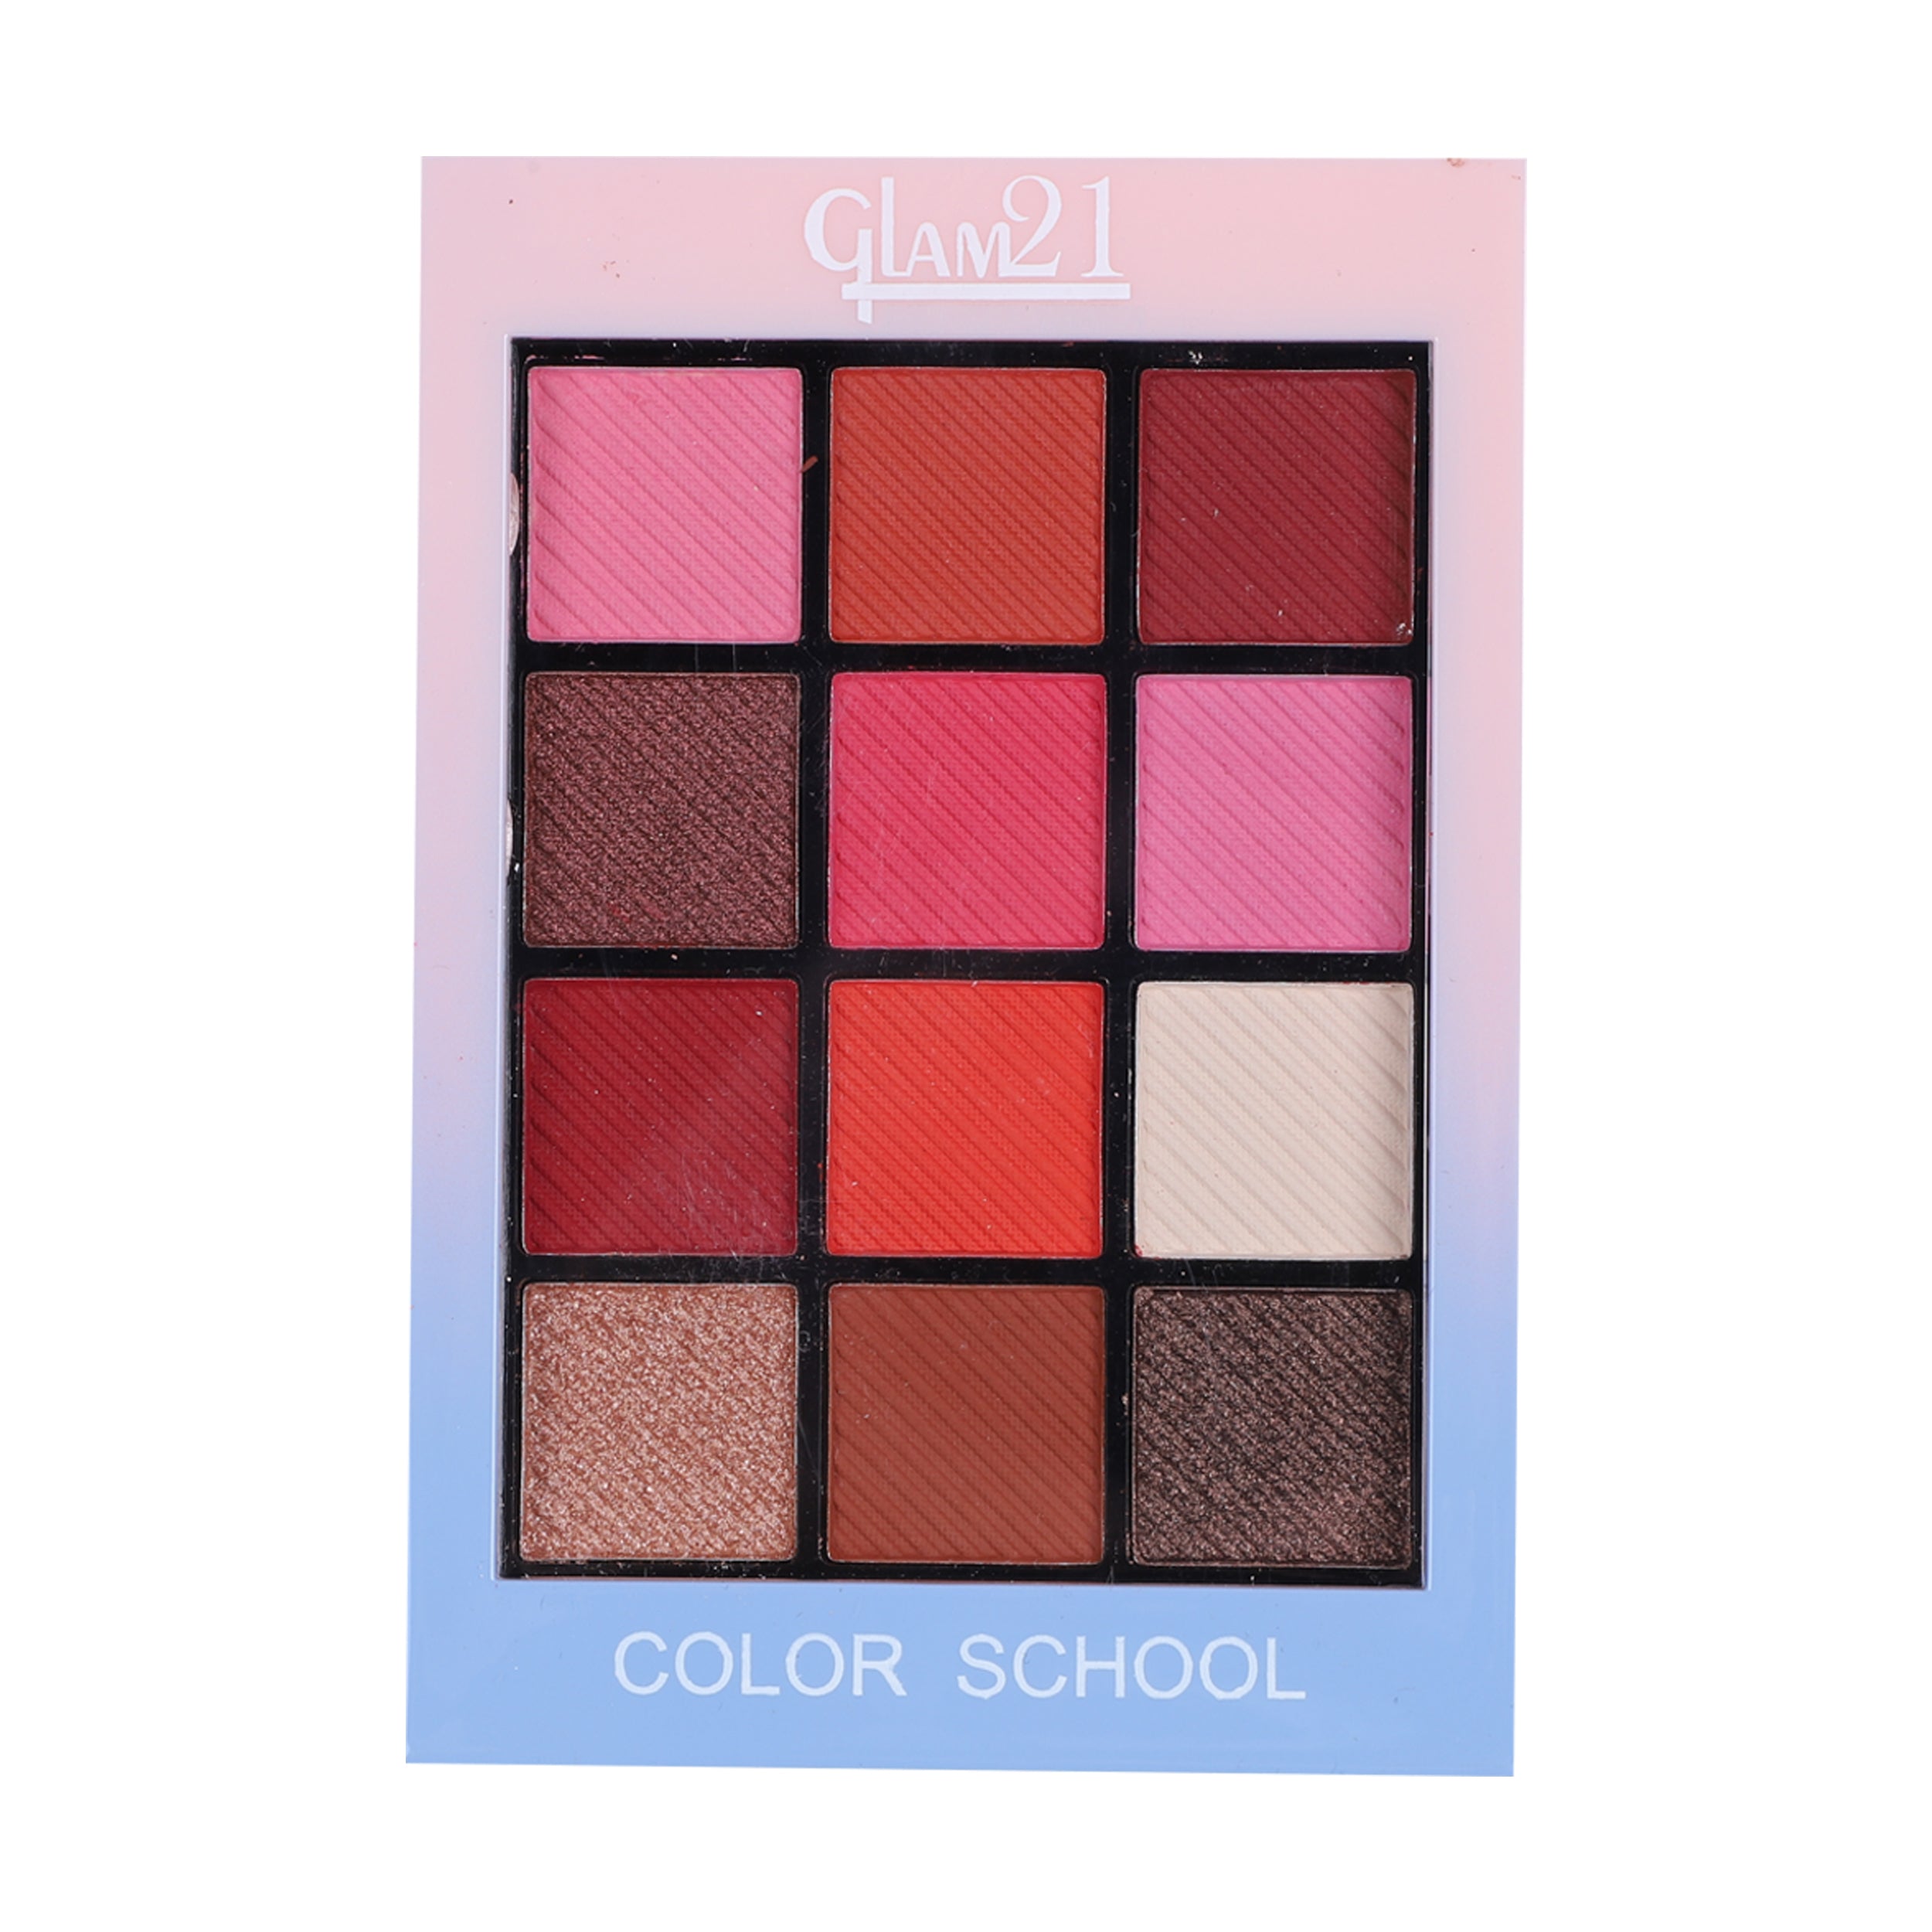 Glam21 Color School Eyeshadow Palette 12 Versatile Colors Long-Staying|Sparkles & Matte 10 g (Shade-02)